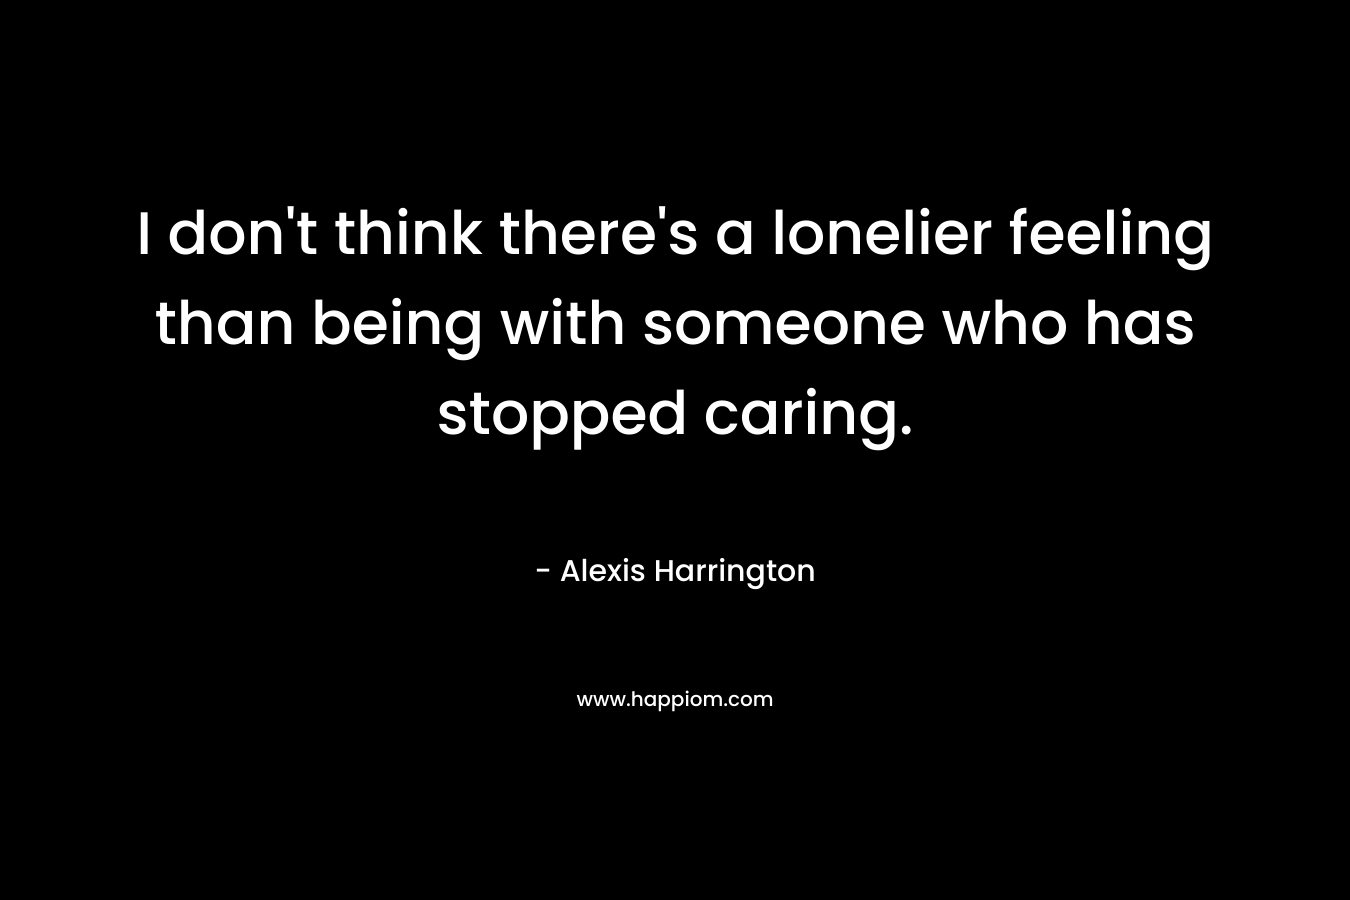 I don't think there's a lonelier feeling than being with someone who has stopped caring.